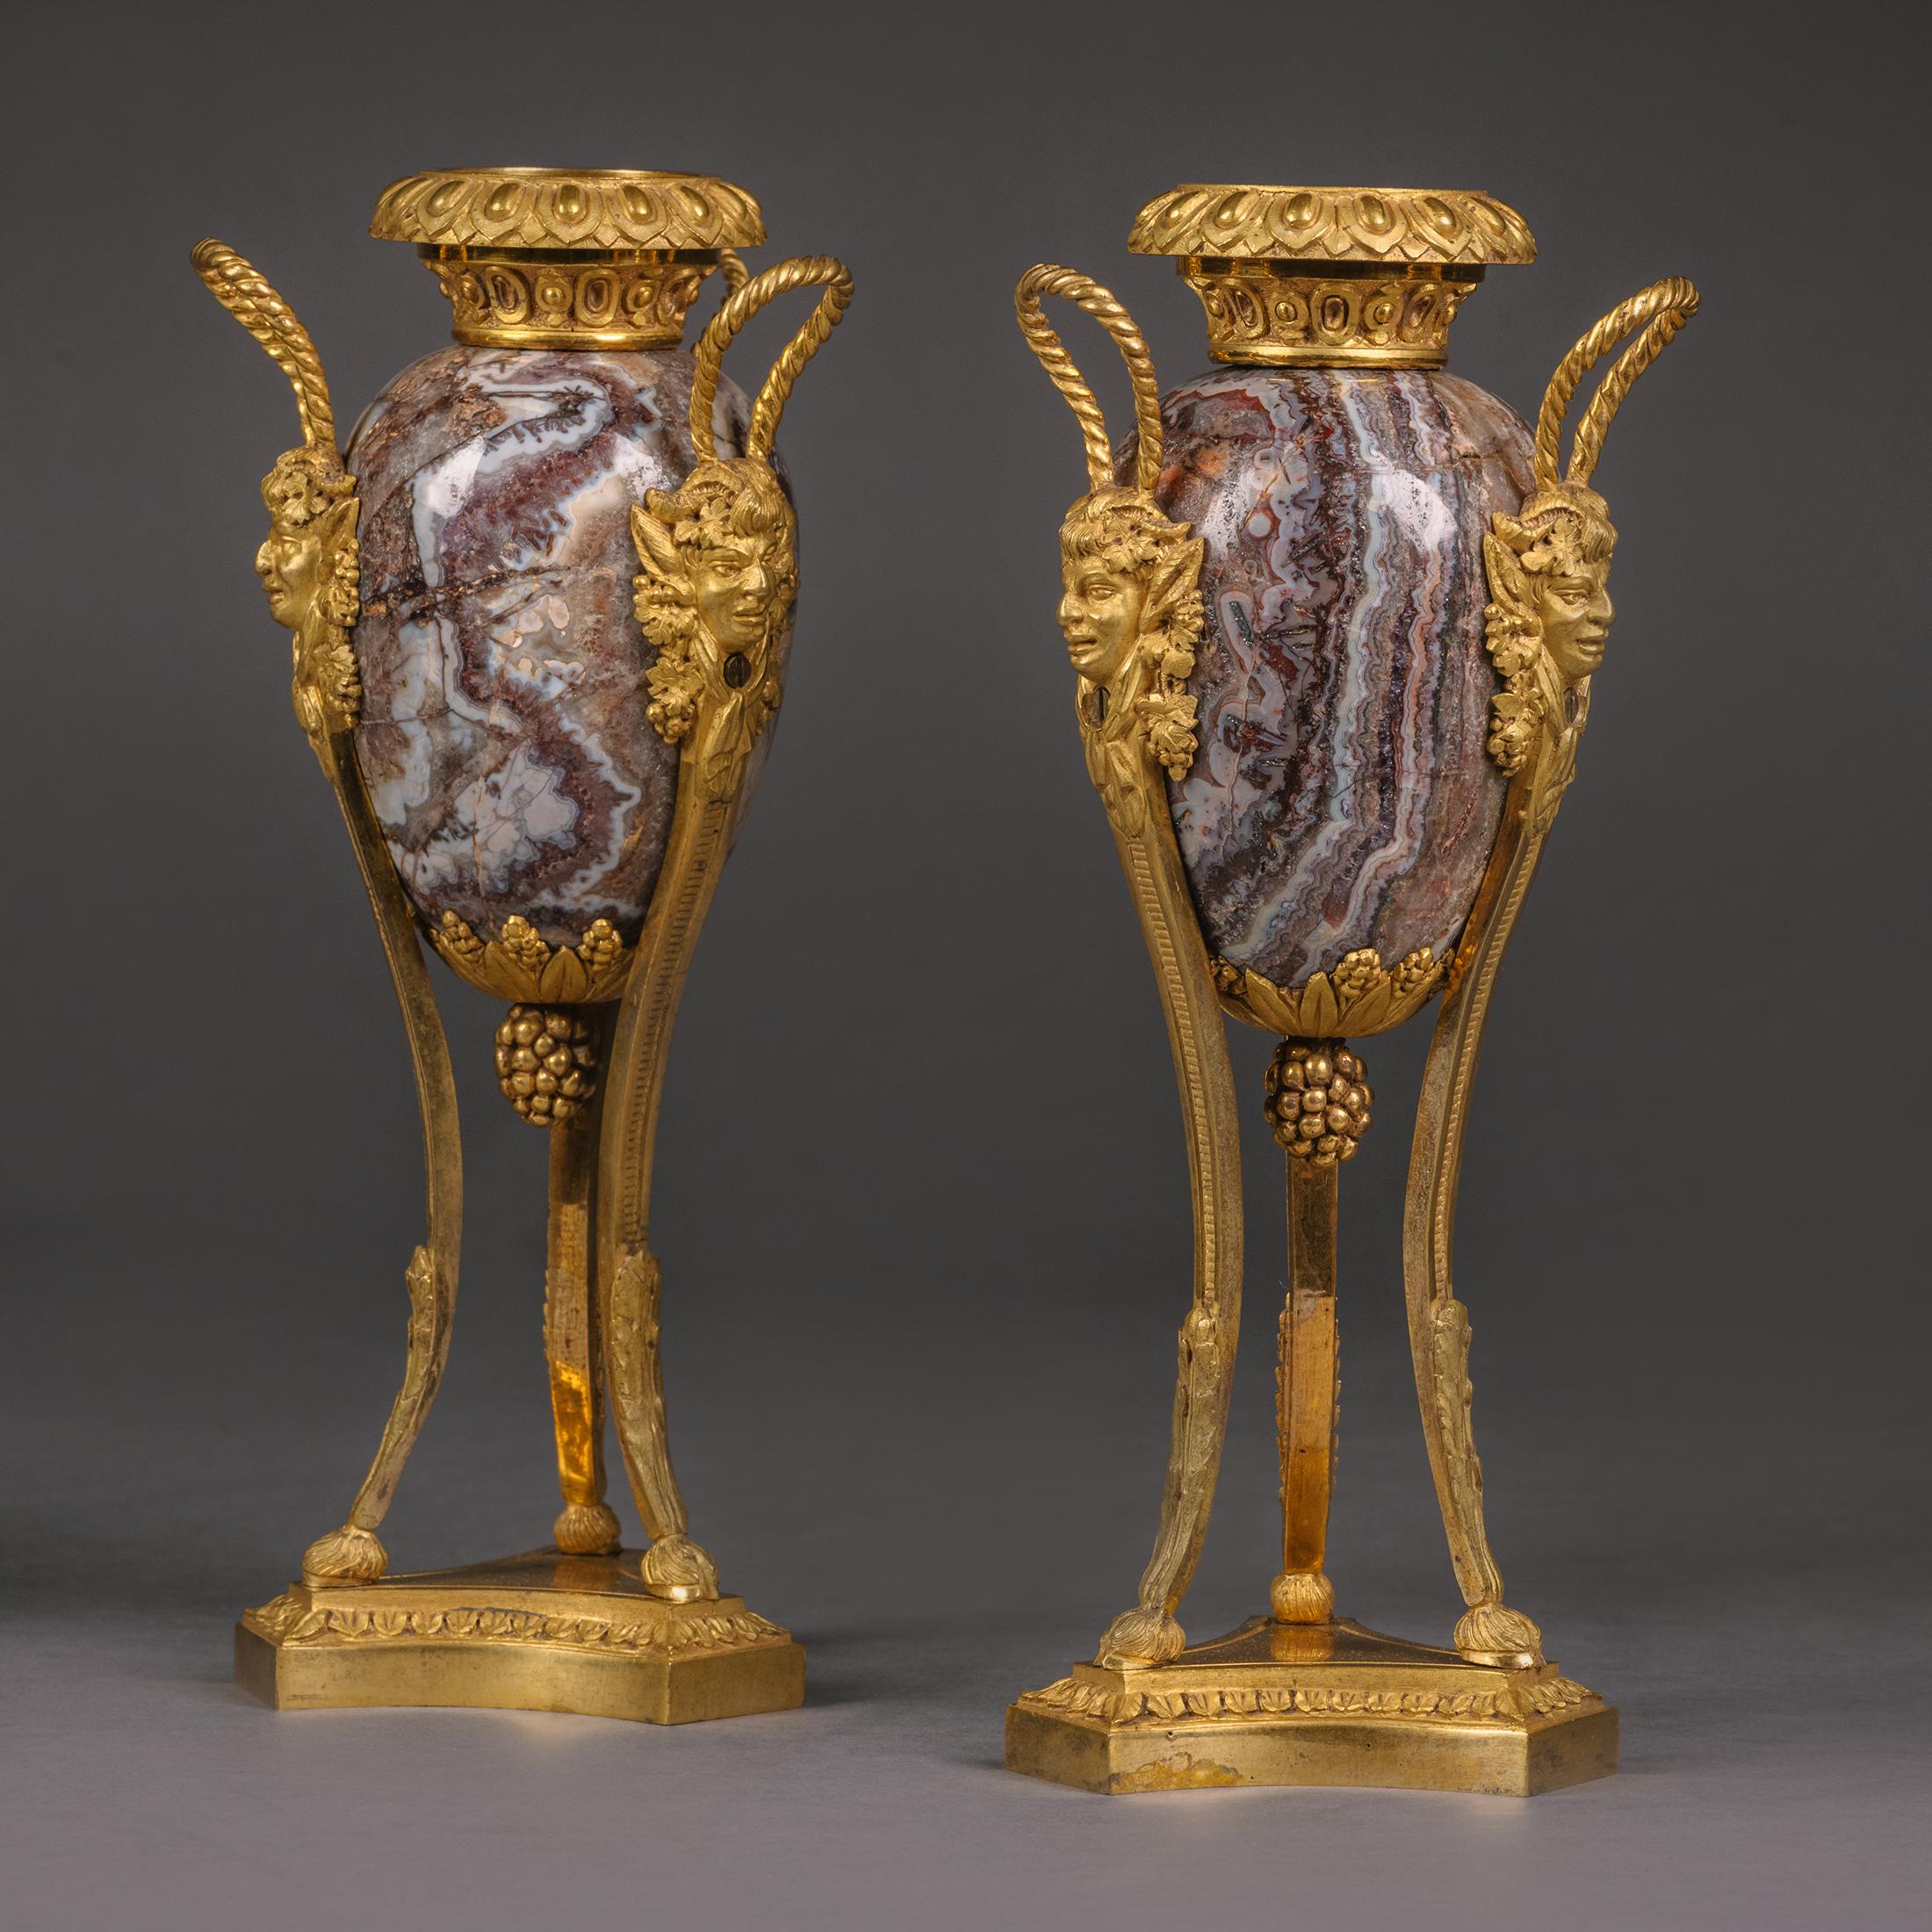 A pair of petite Louis XVI style gilt-bronze mounted fluorspar cassolettes. 

Each cassolette having an ovoid form fluorspar body surmounted by a gilt-bronze stiff-leaf cast neck, a berried terminal, and gilt-bronze Bacchic mask and looped